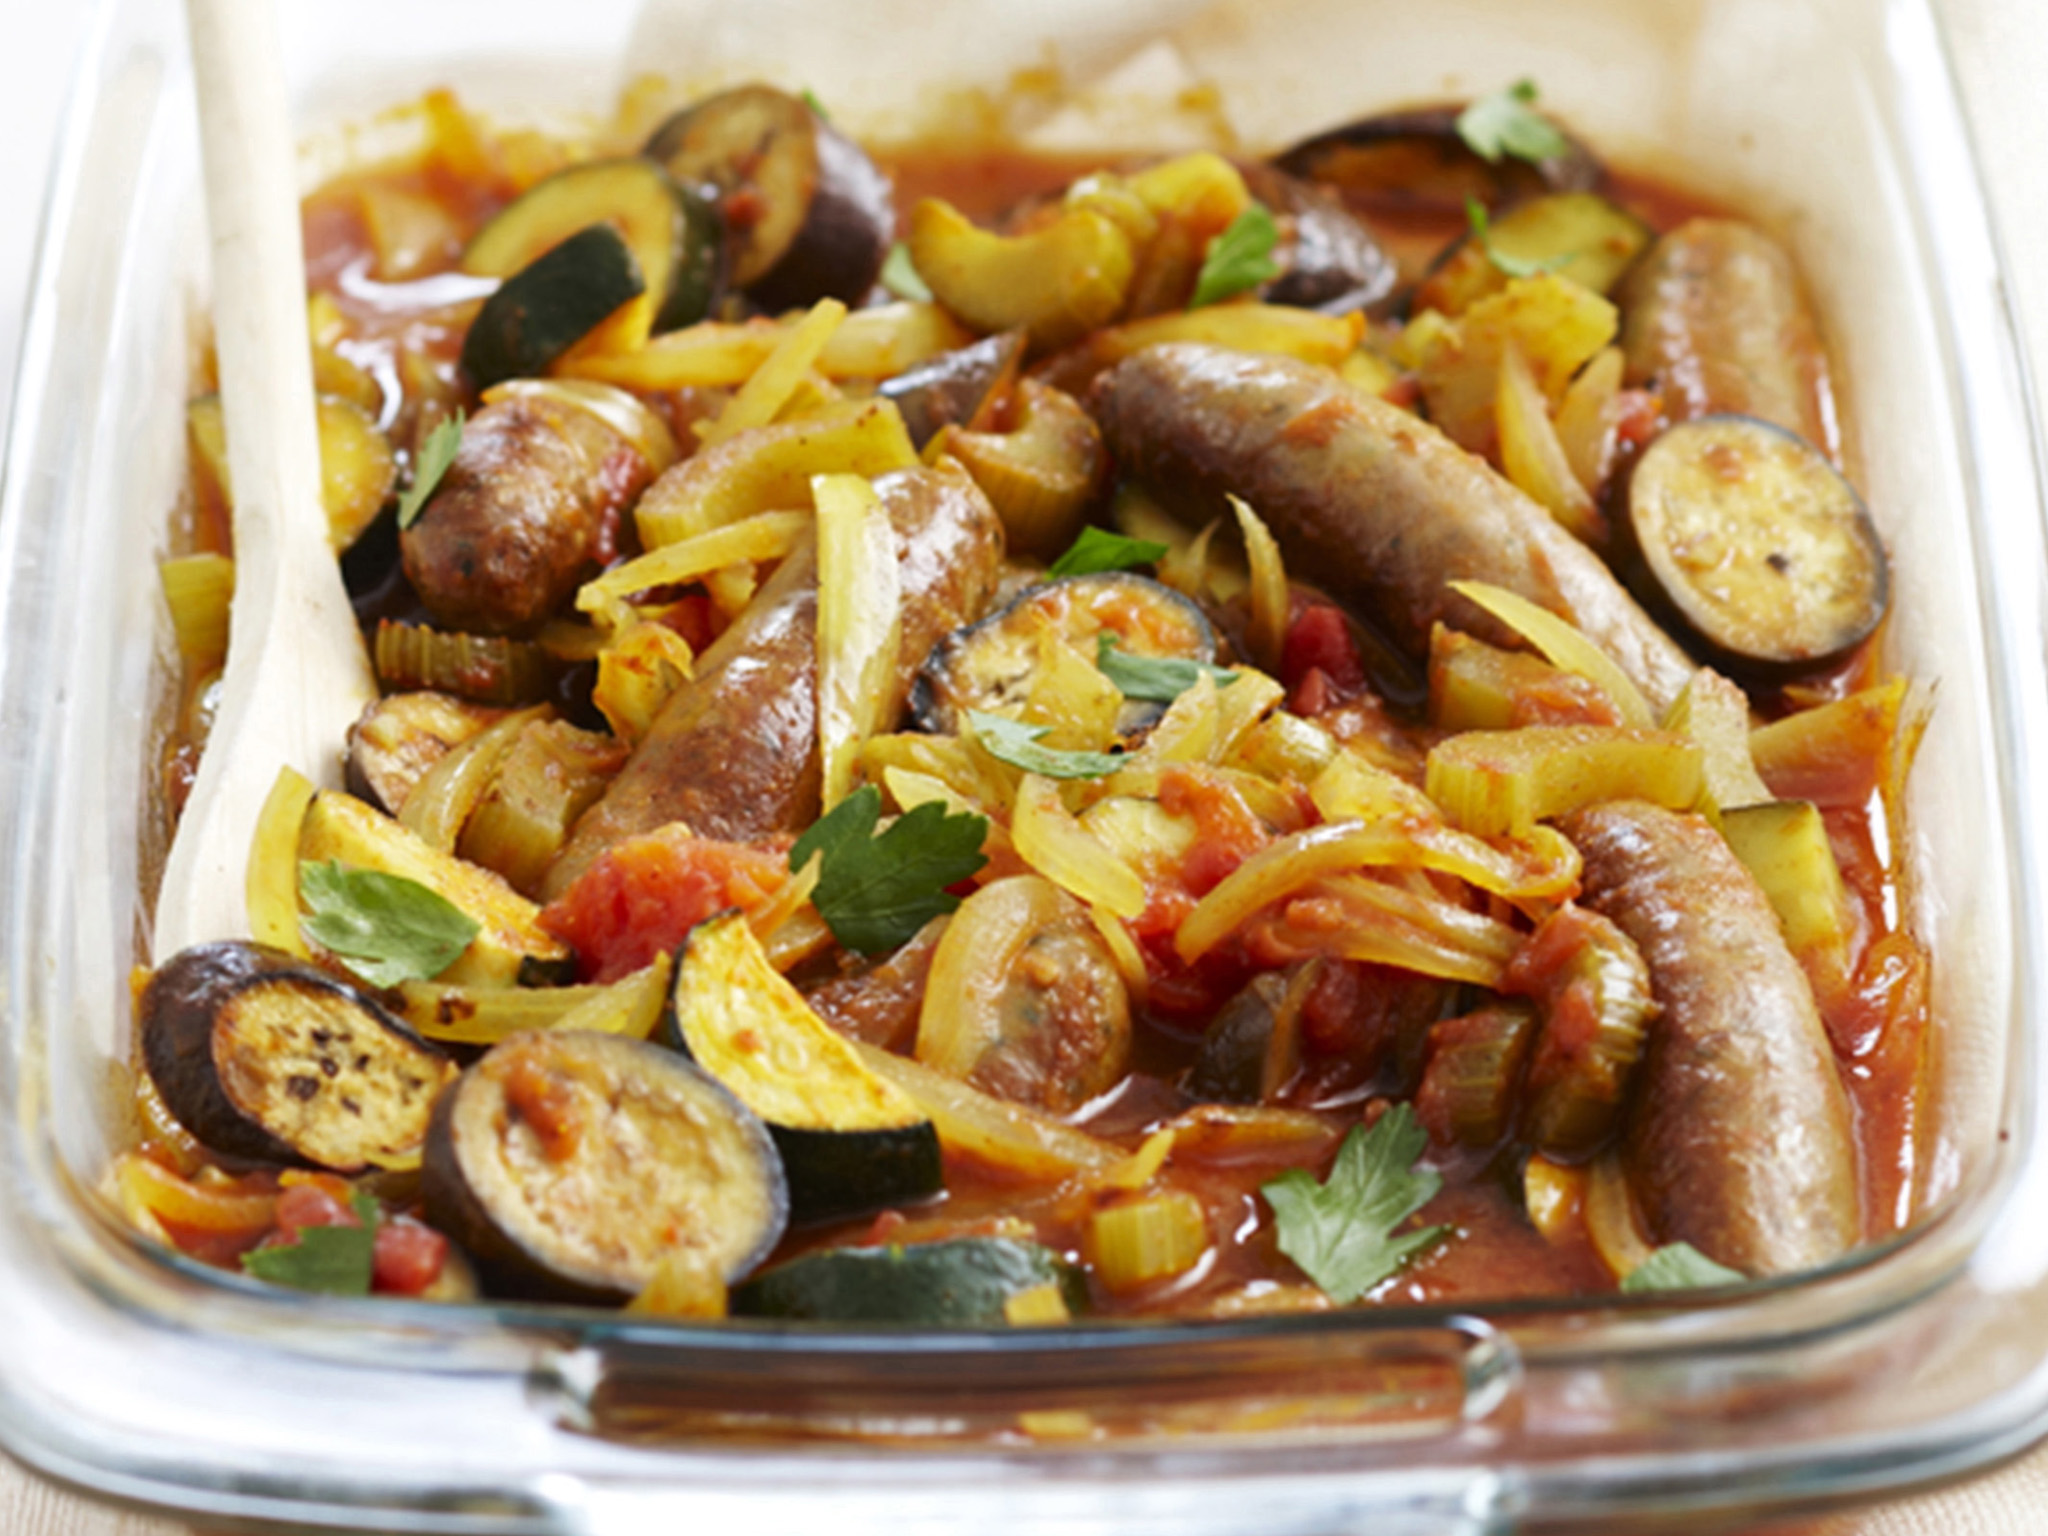 Curried sausage and vegetable bake